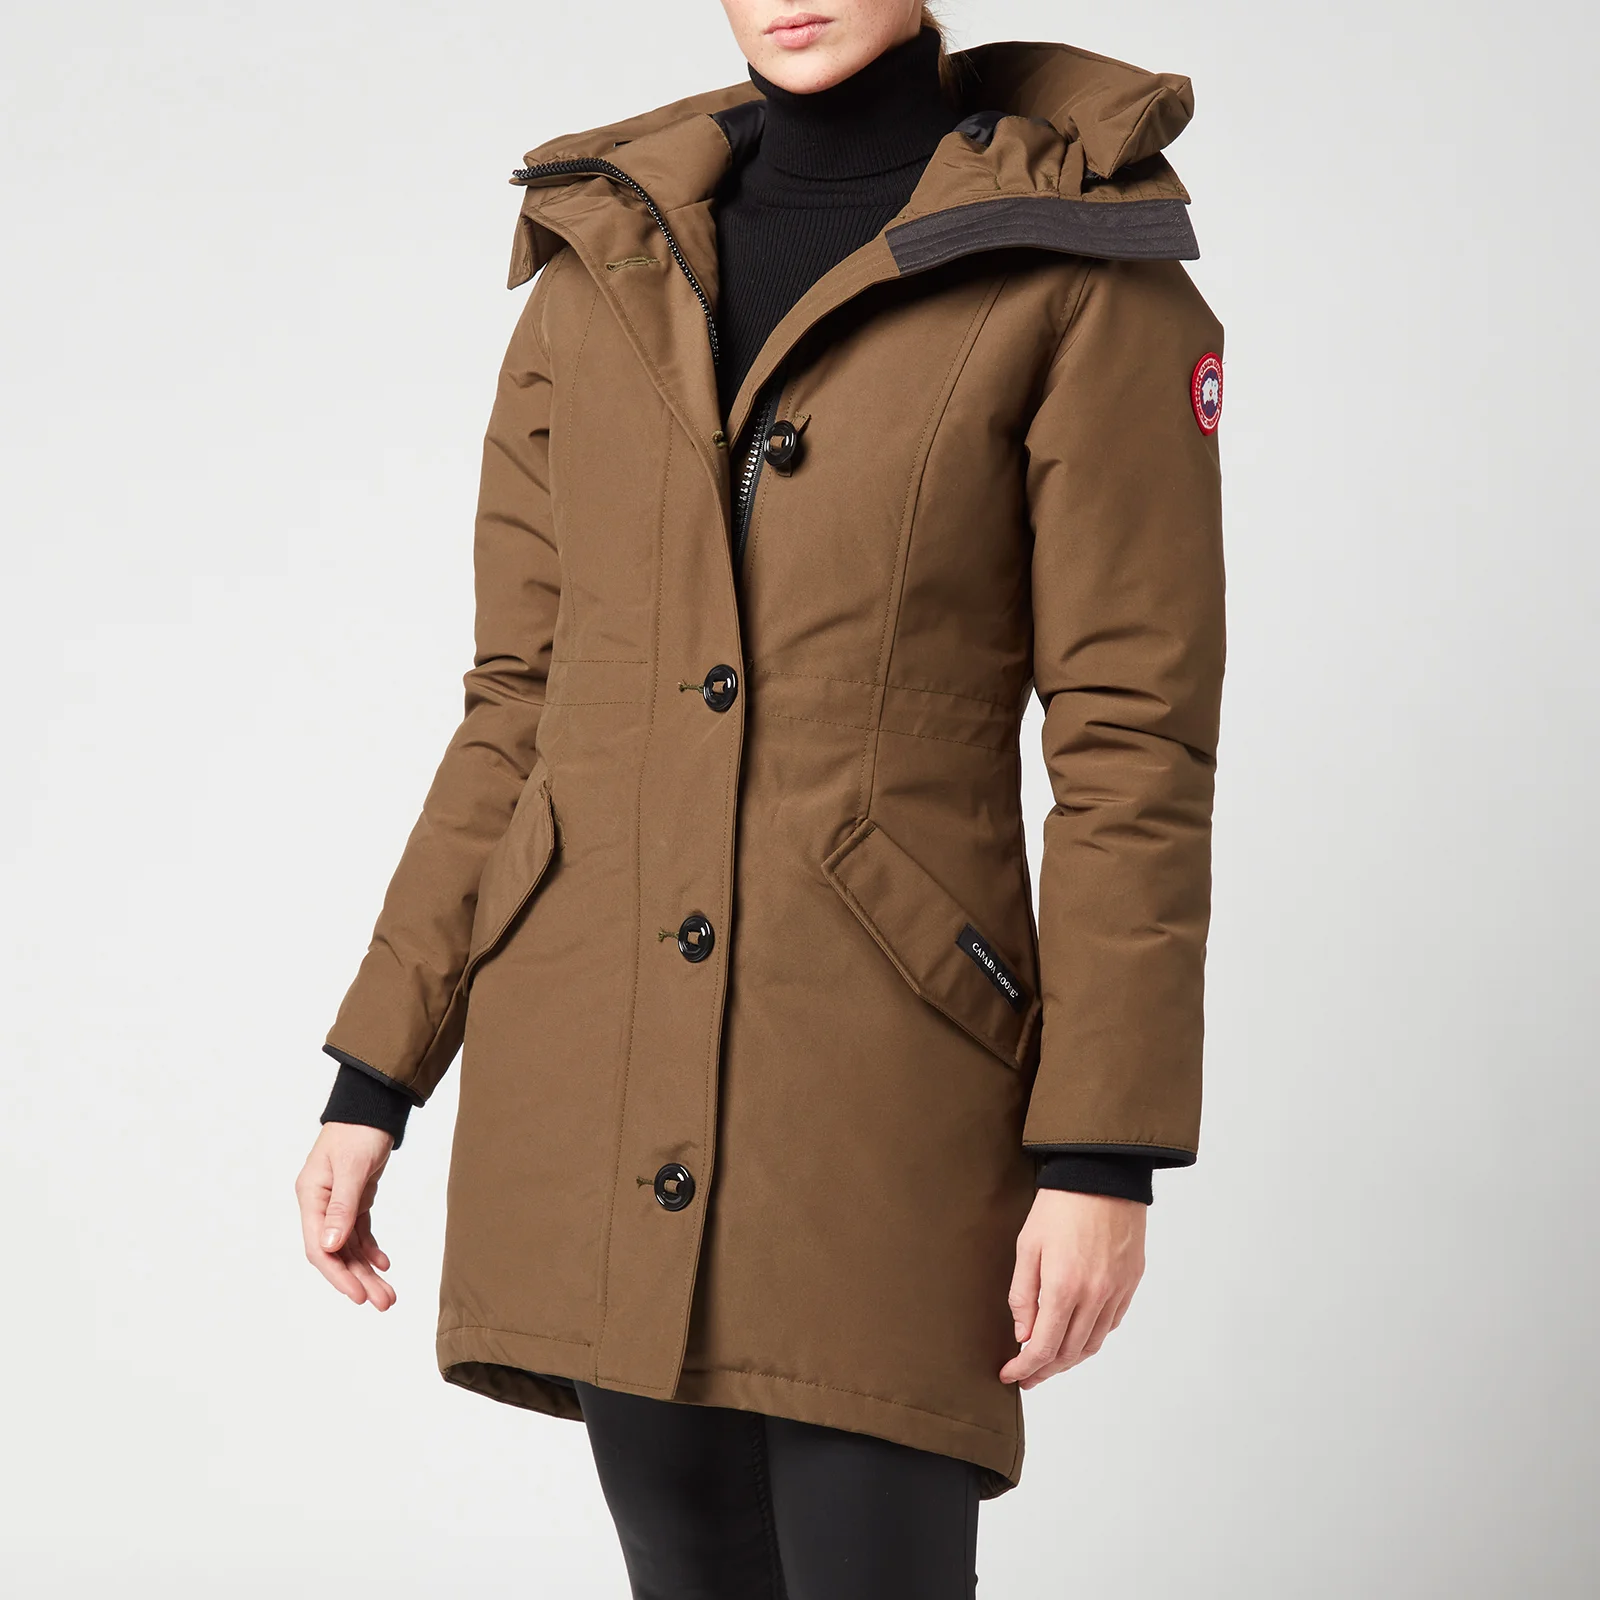 Canada Goose Women's Rossclair Parka - Notched Brim - Military Green Image 1